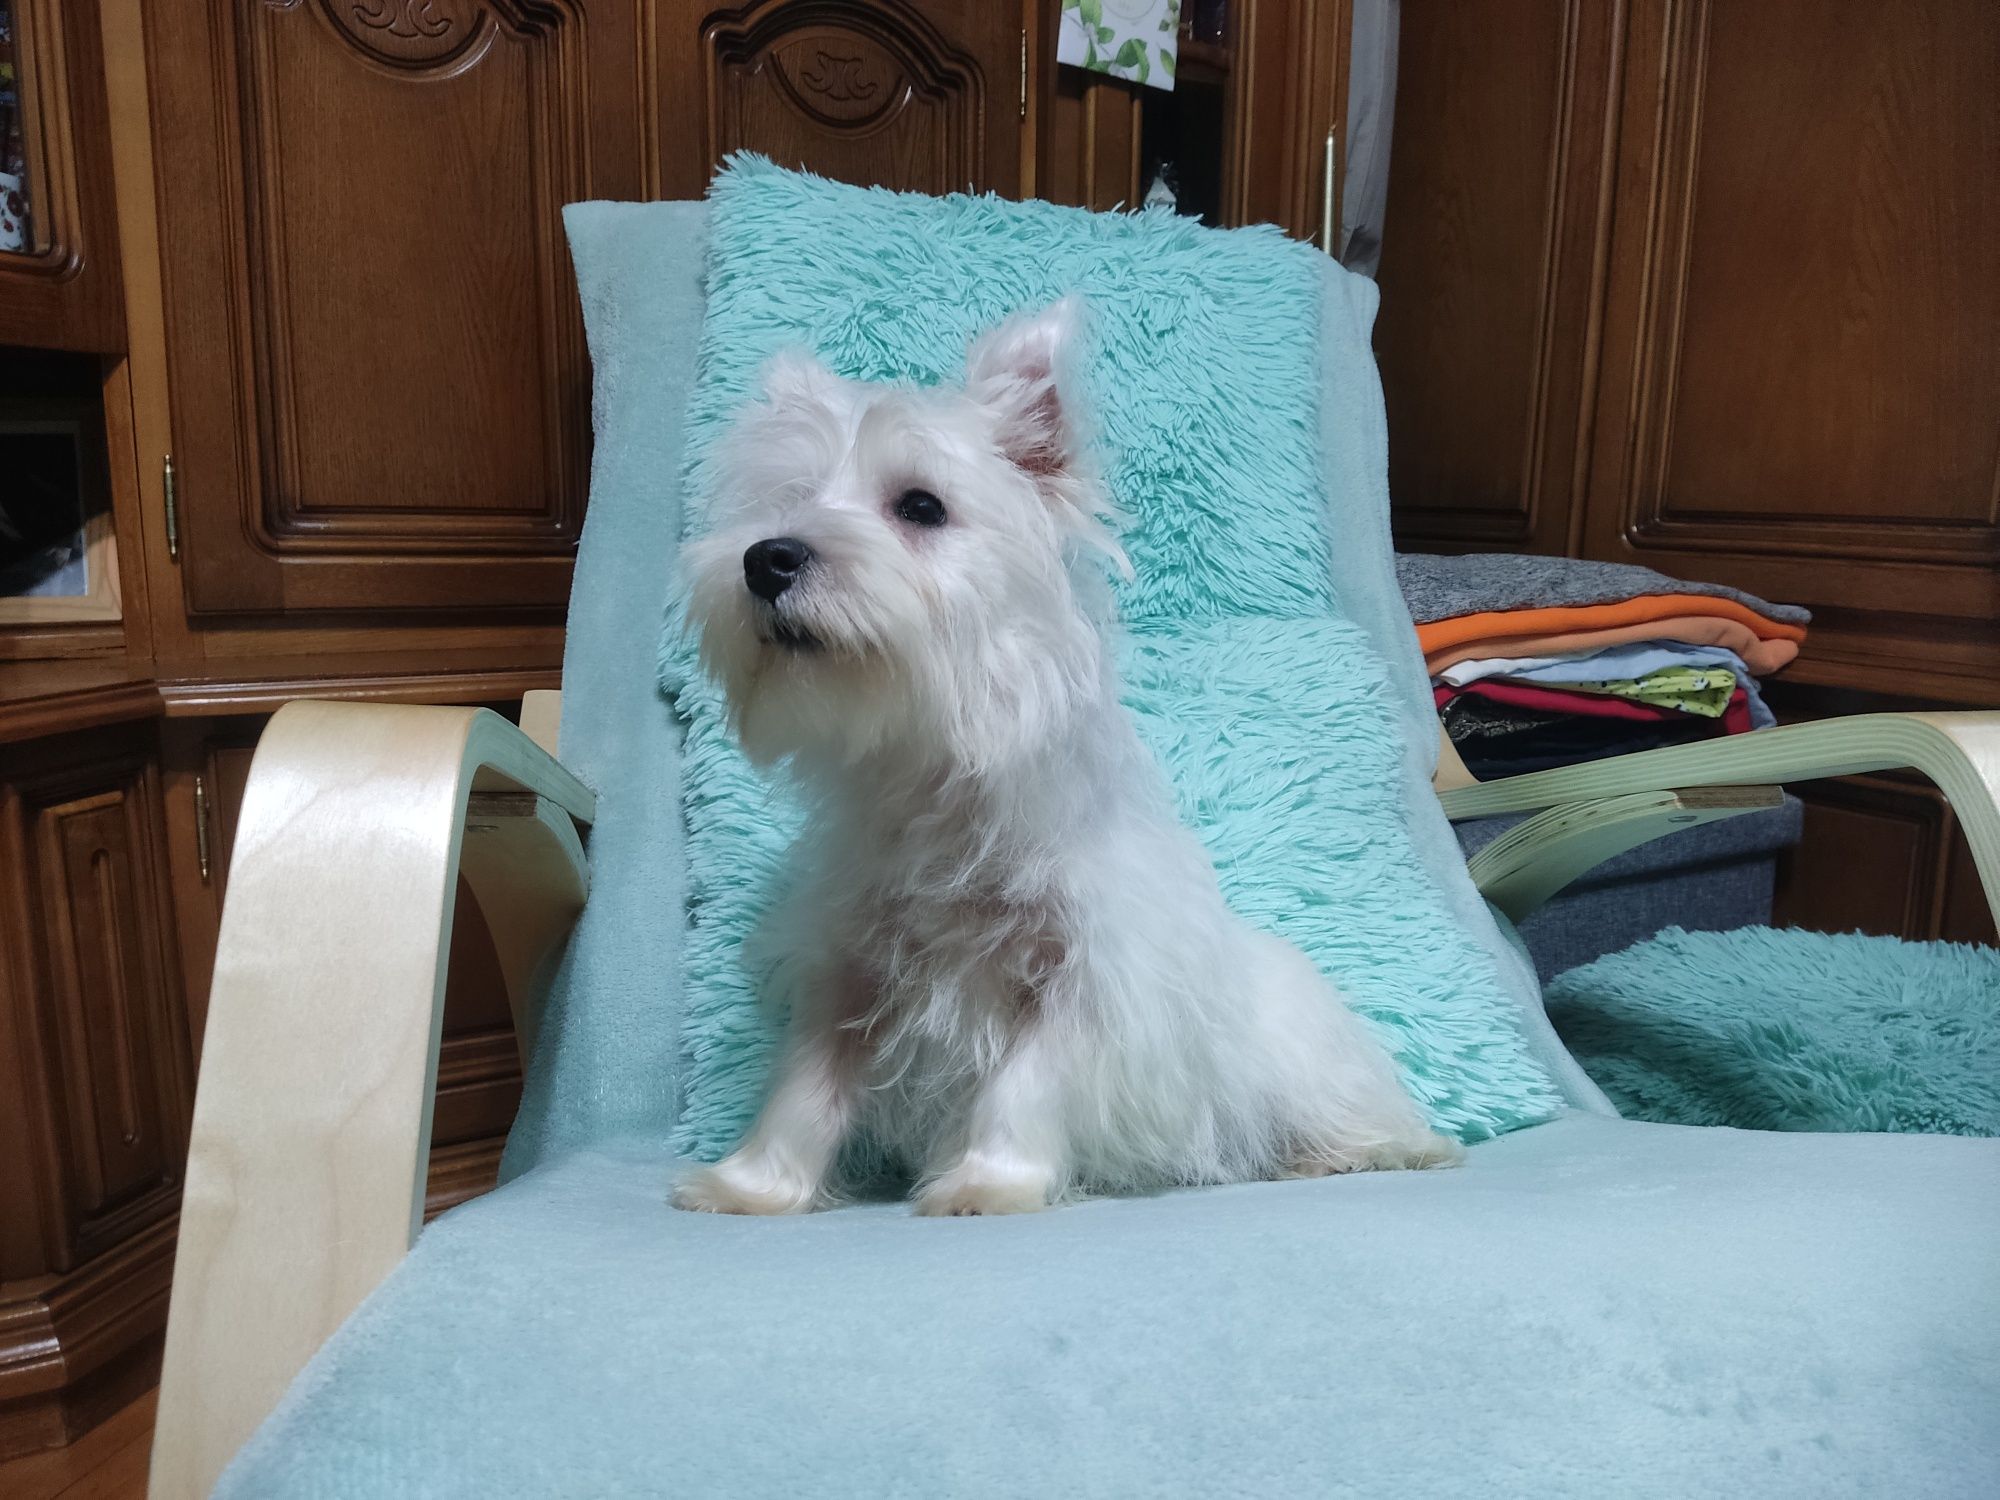 Vand catei west highland white terrier(westie) Pasaport si microcip